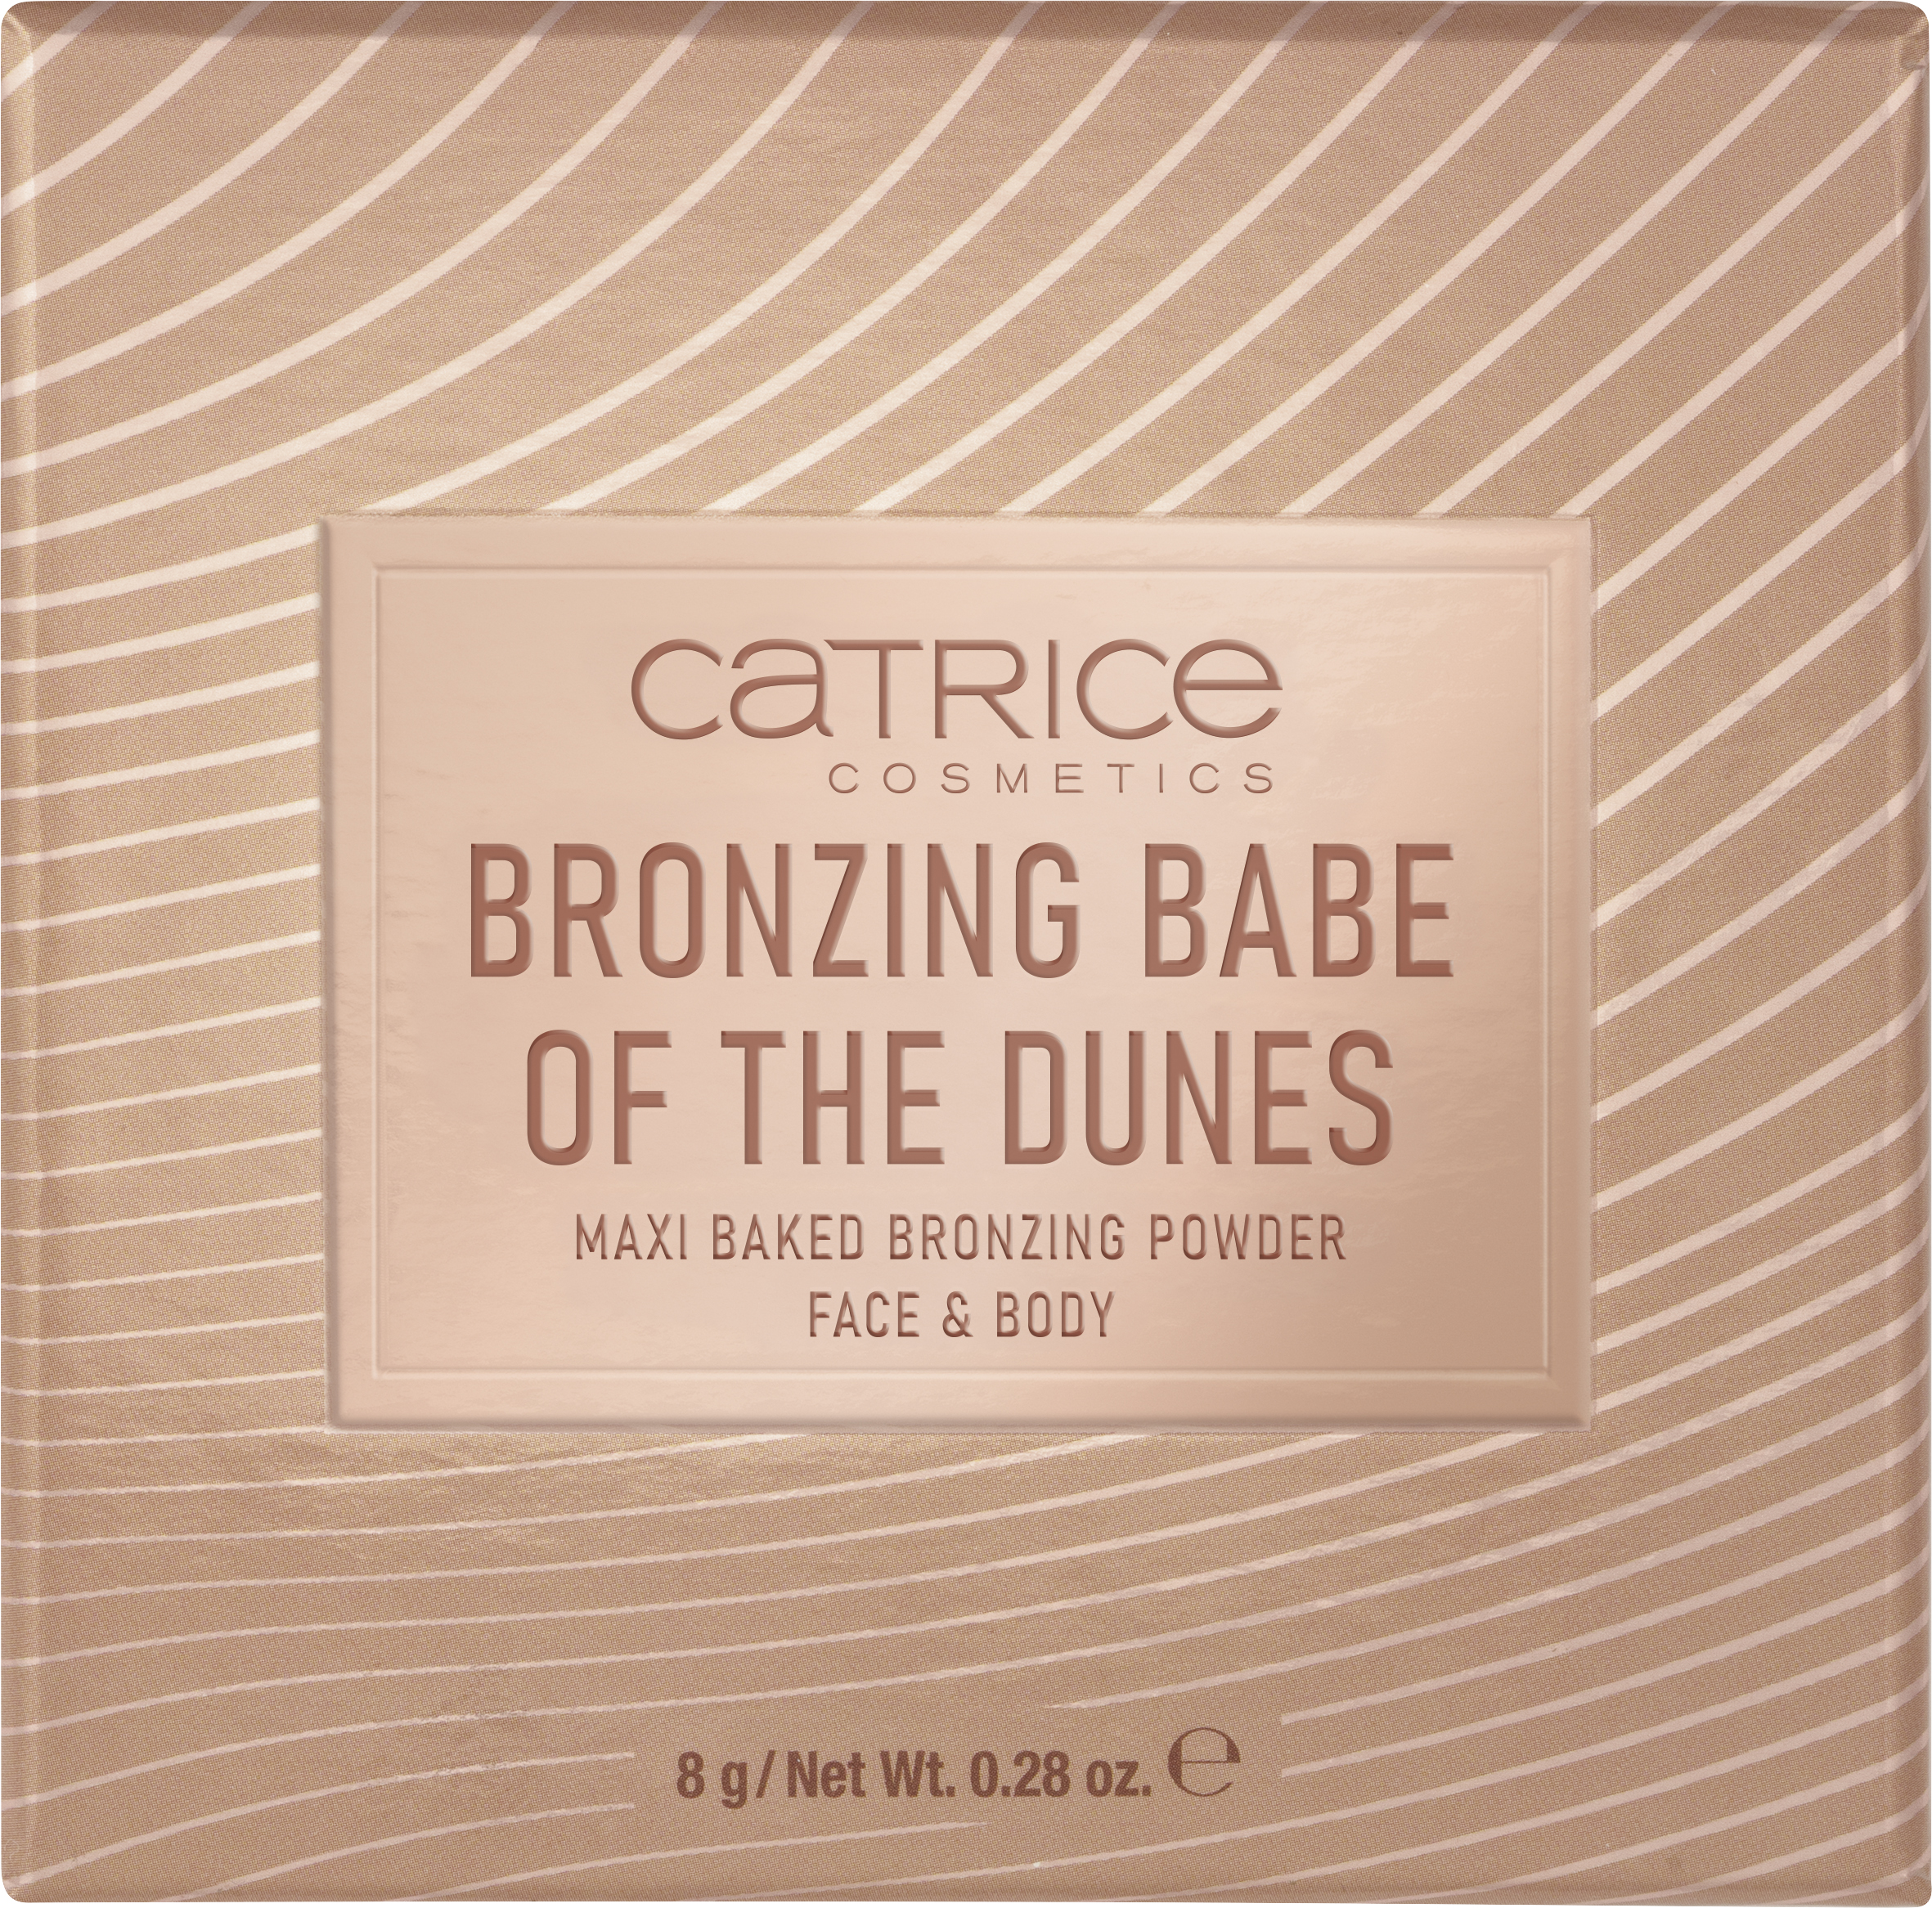 Dunes Of Catrice The 10 Tansation Bronzing Queensize Babe